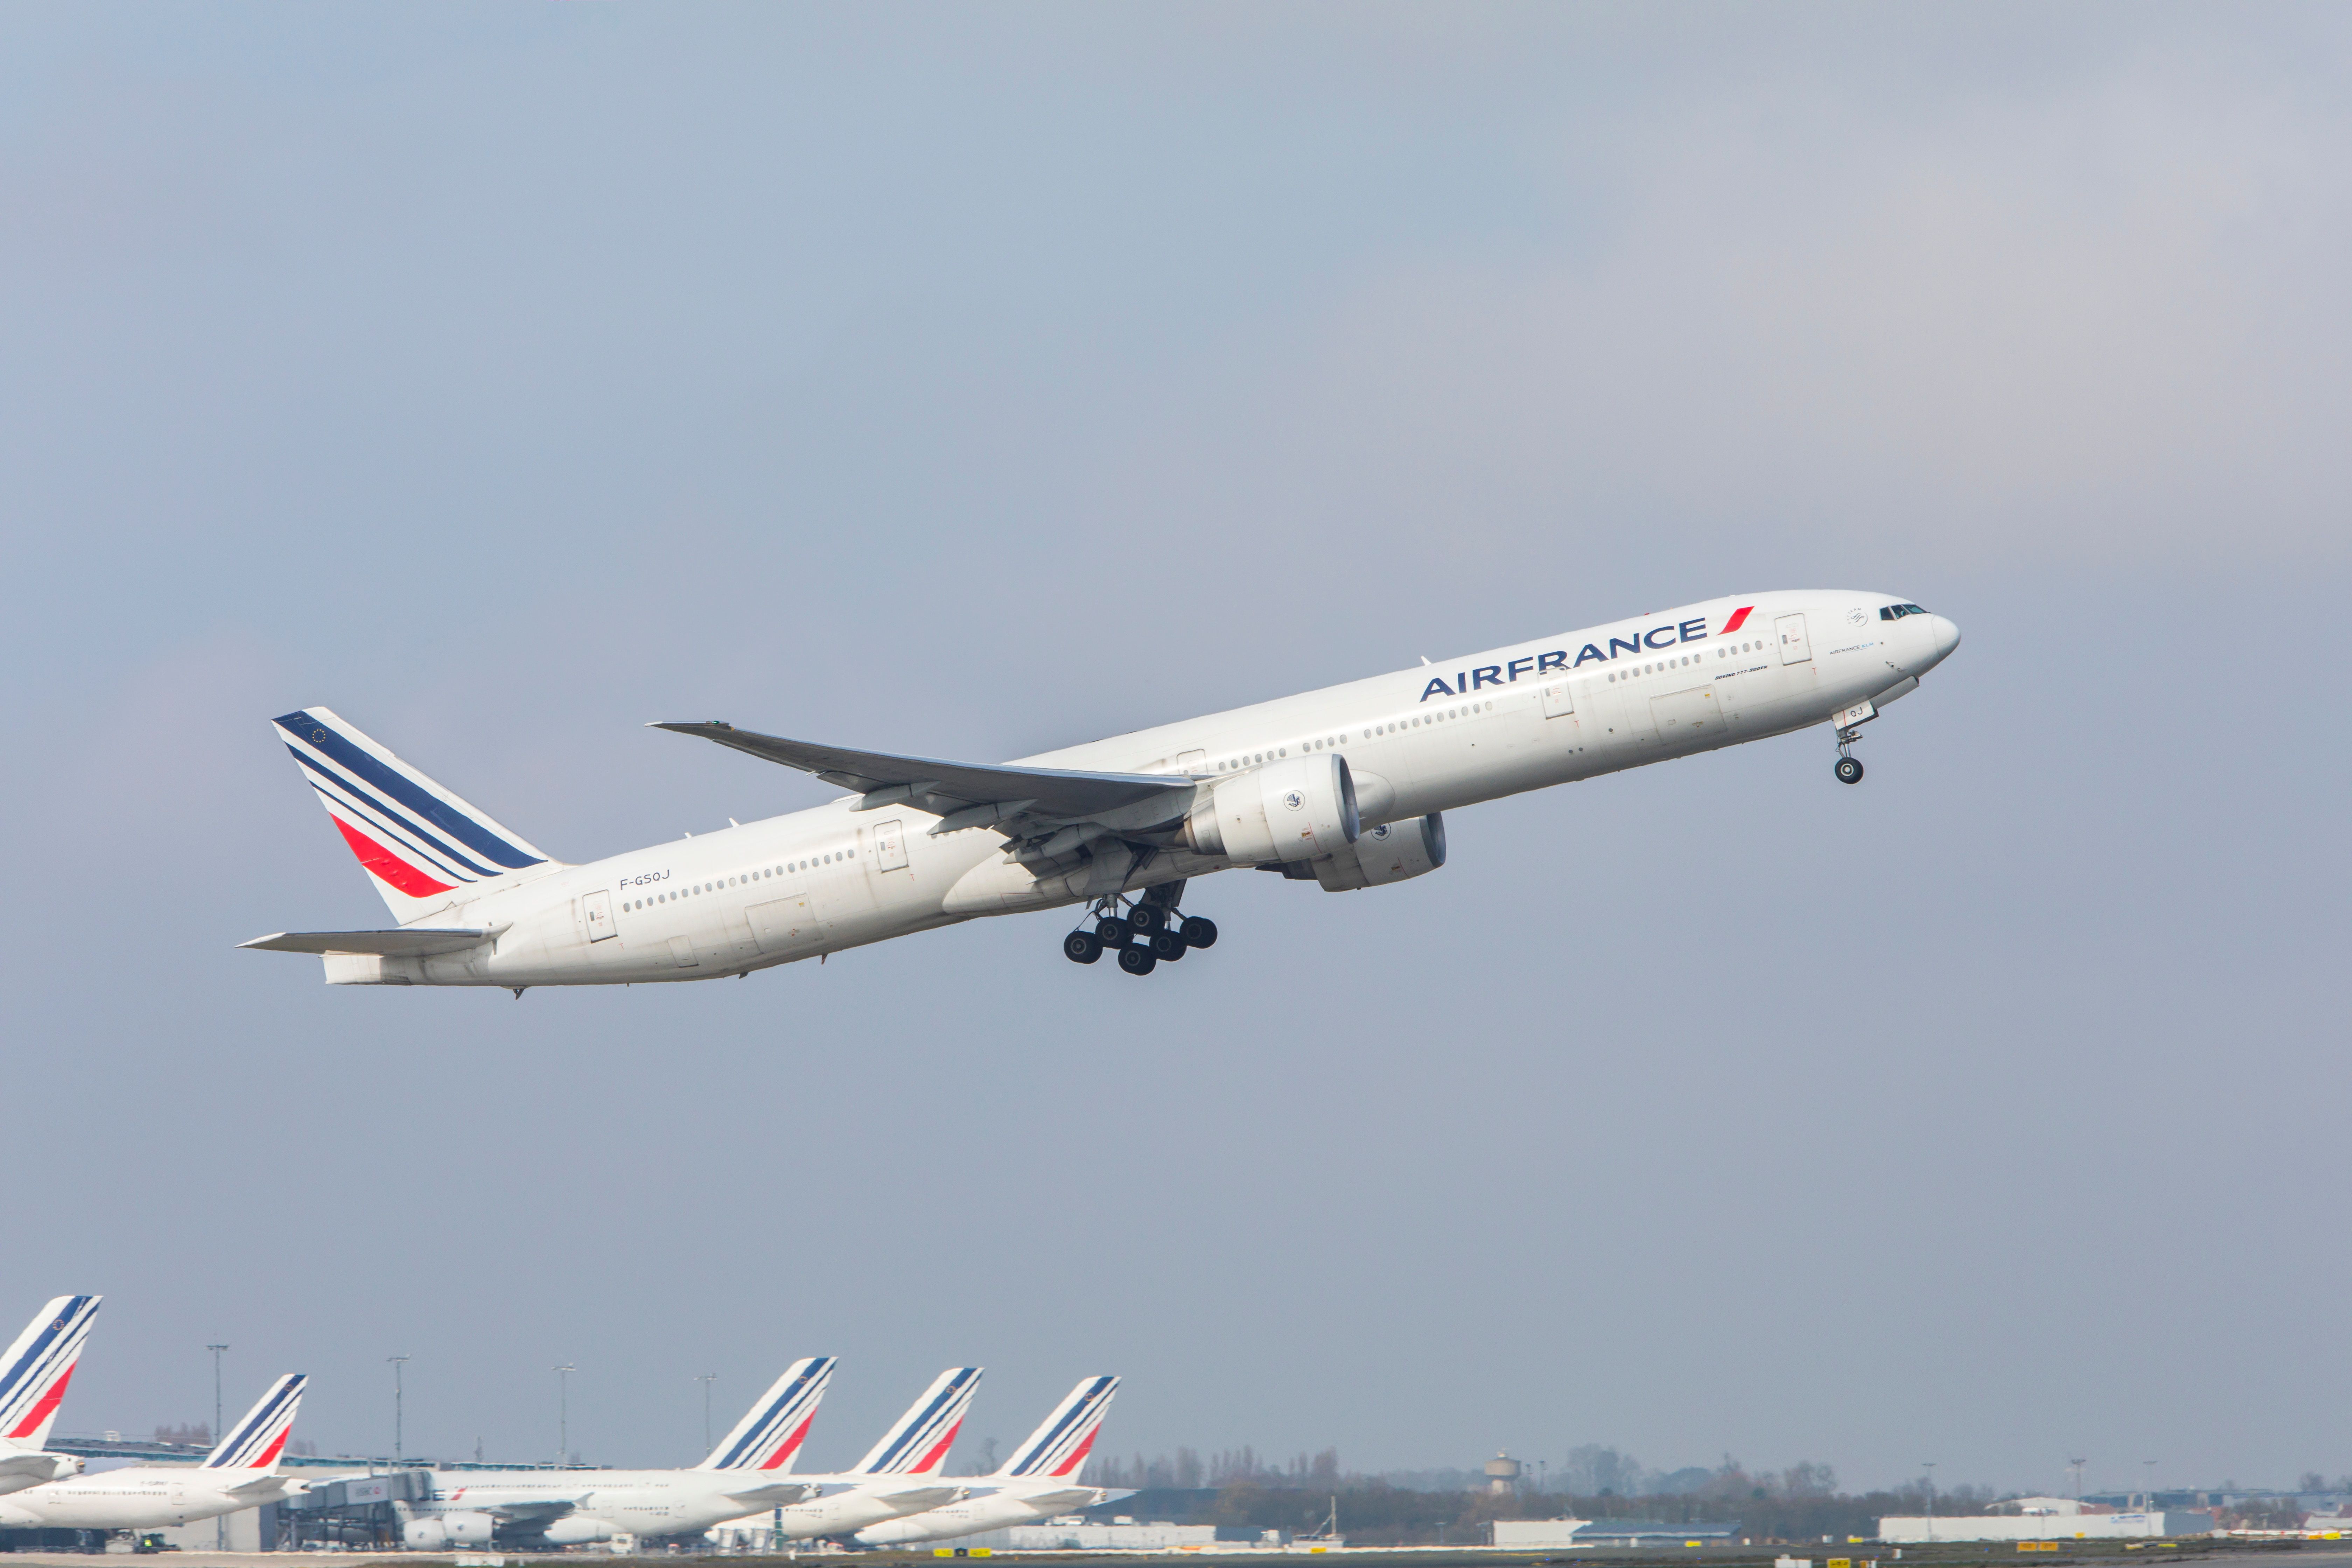 AirFrance Boeing 777-300 